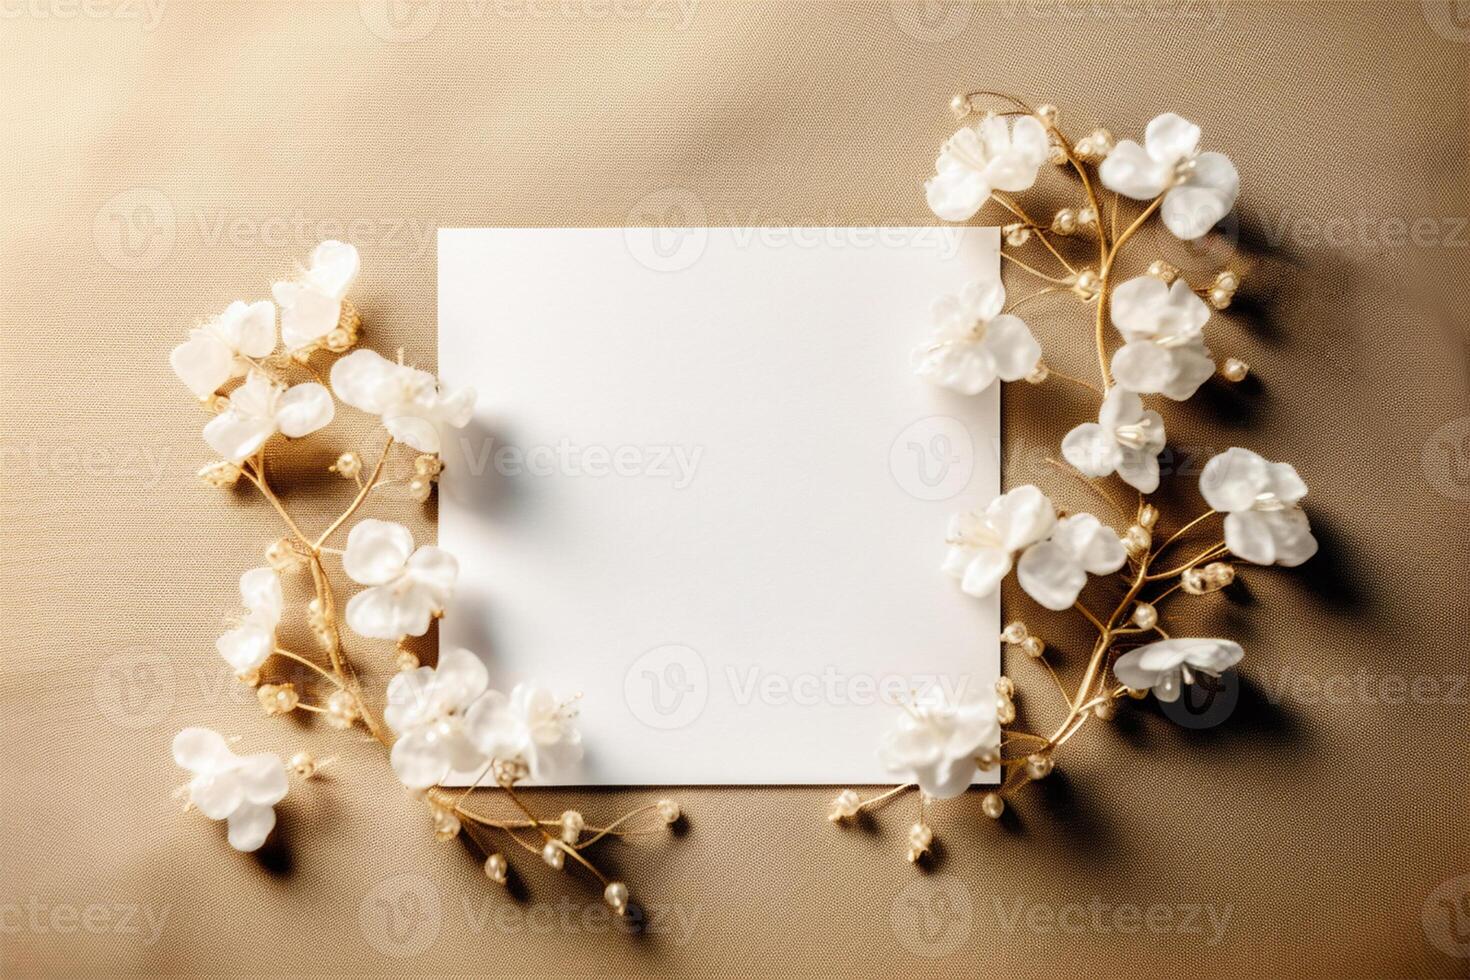 Top View of Blank Paper Sheet Card Mockup with White Cherry Blossom Branches, Pearls on Jute Texture Background. Minimal Aesthetic Wedding Invitation Template, . photo